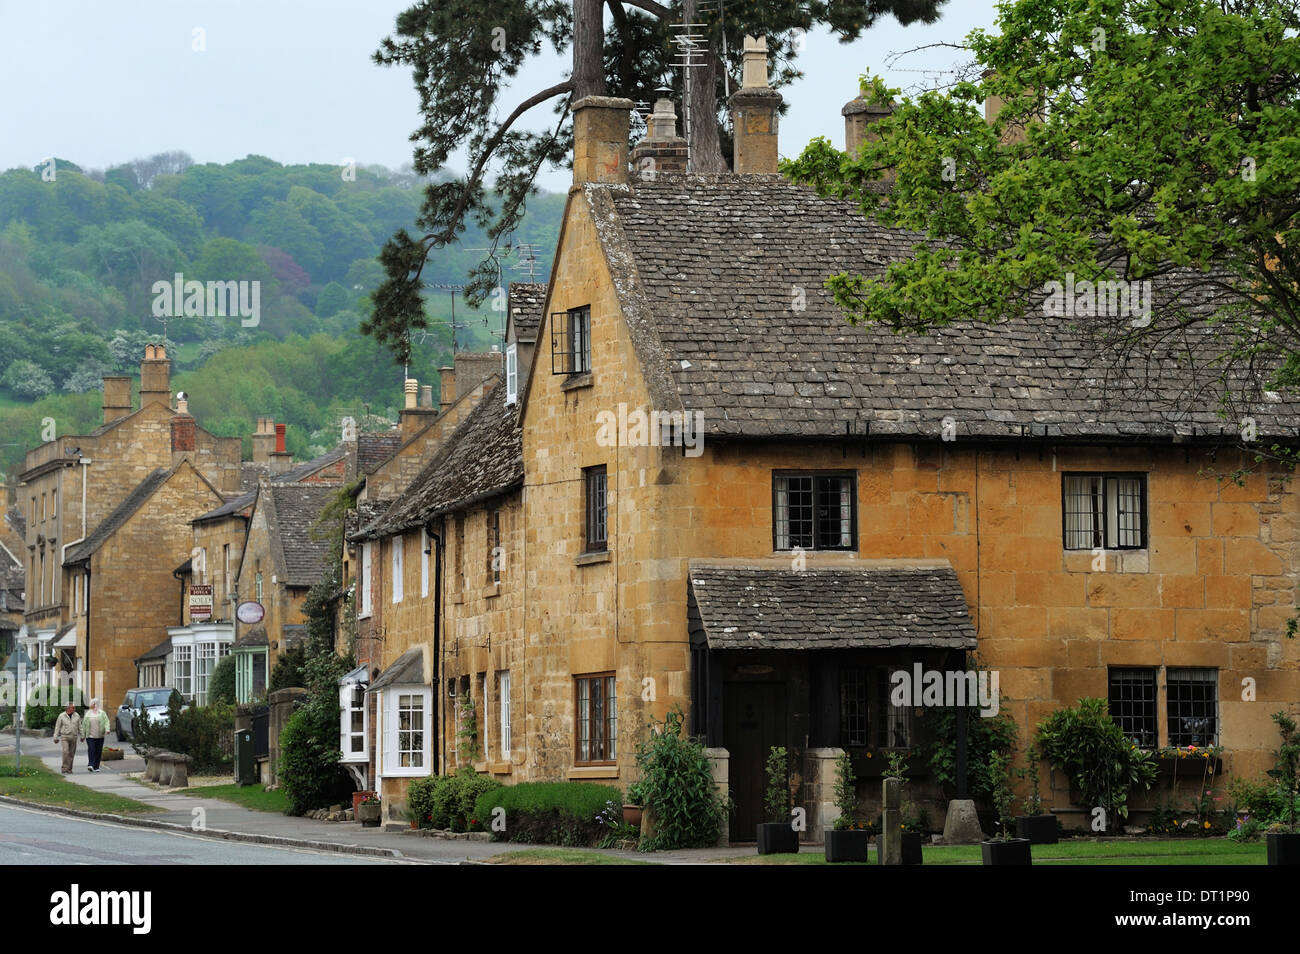 Cotswold stone houses, Broadway, The Cotswolds, Worcestershire, England, United Kingdom, Europe Stock Photo